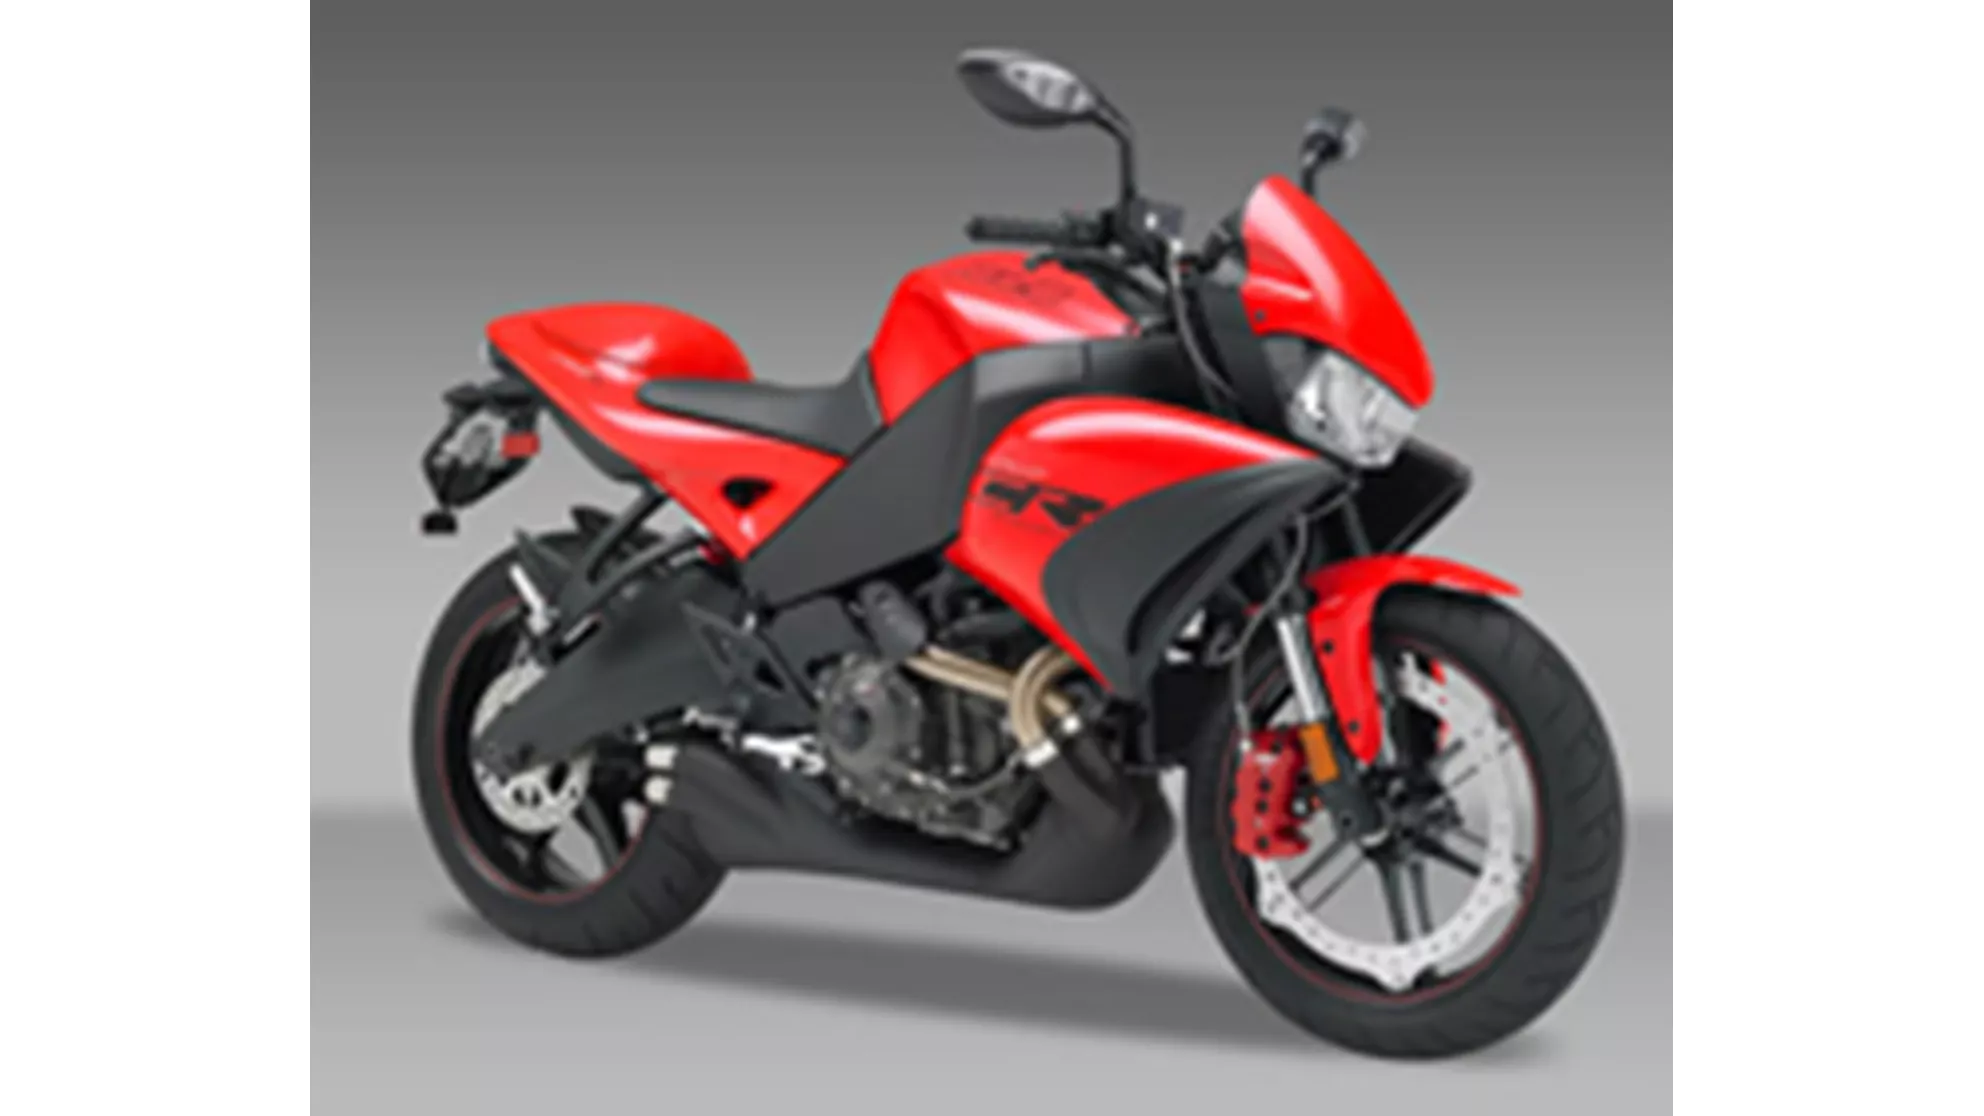 Buell 1125 CR - Image 1